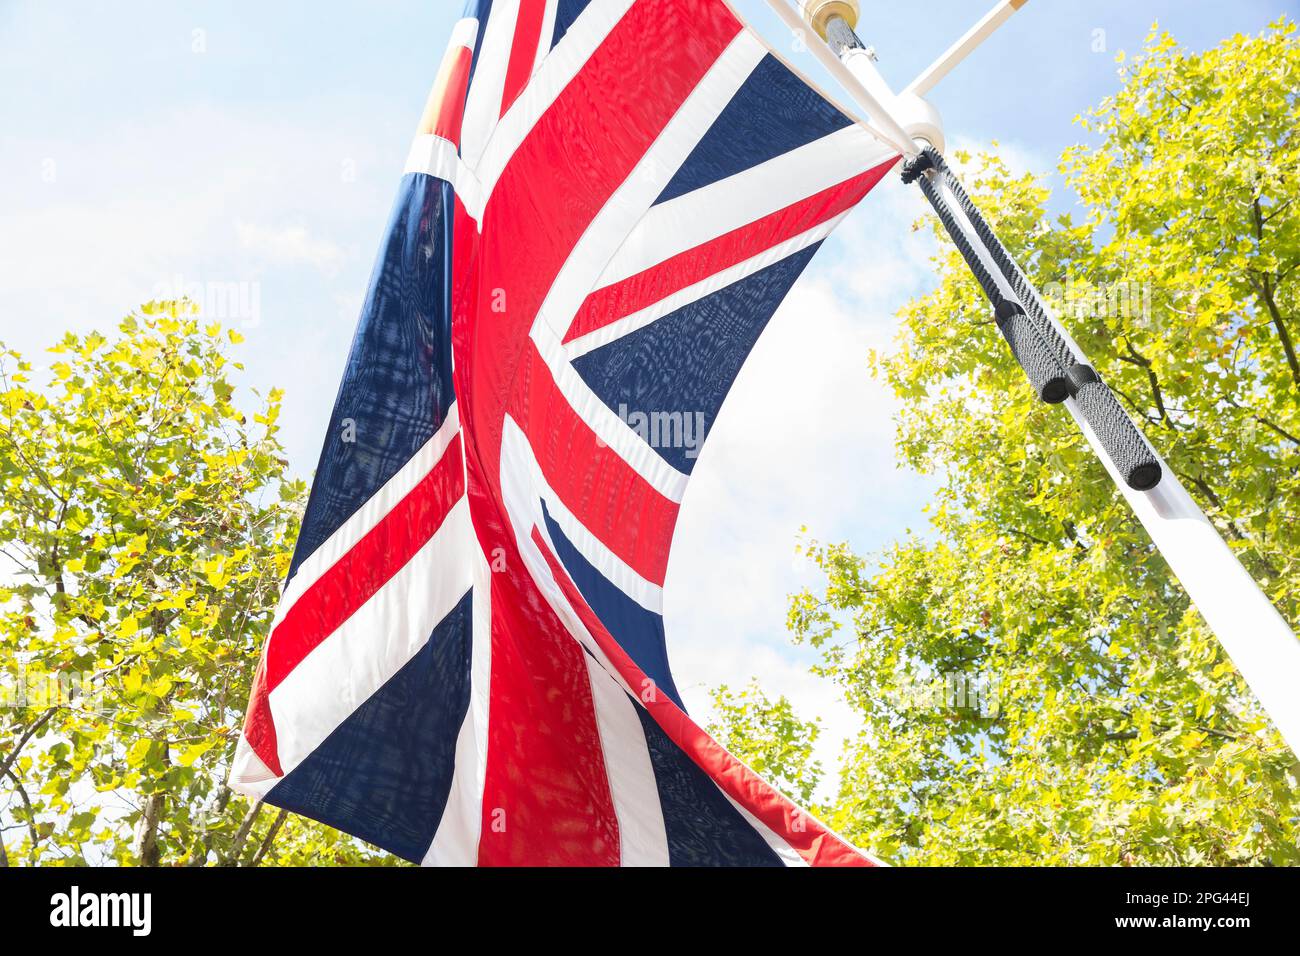 Union flag decorations on The Mall in London as people gather around Buckingham Palace on the 1st Saturday since the funeral of Queen Elizabeth II. Stock Photo